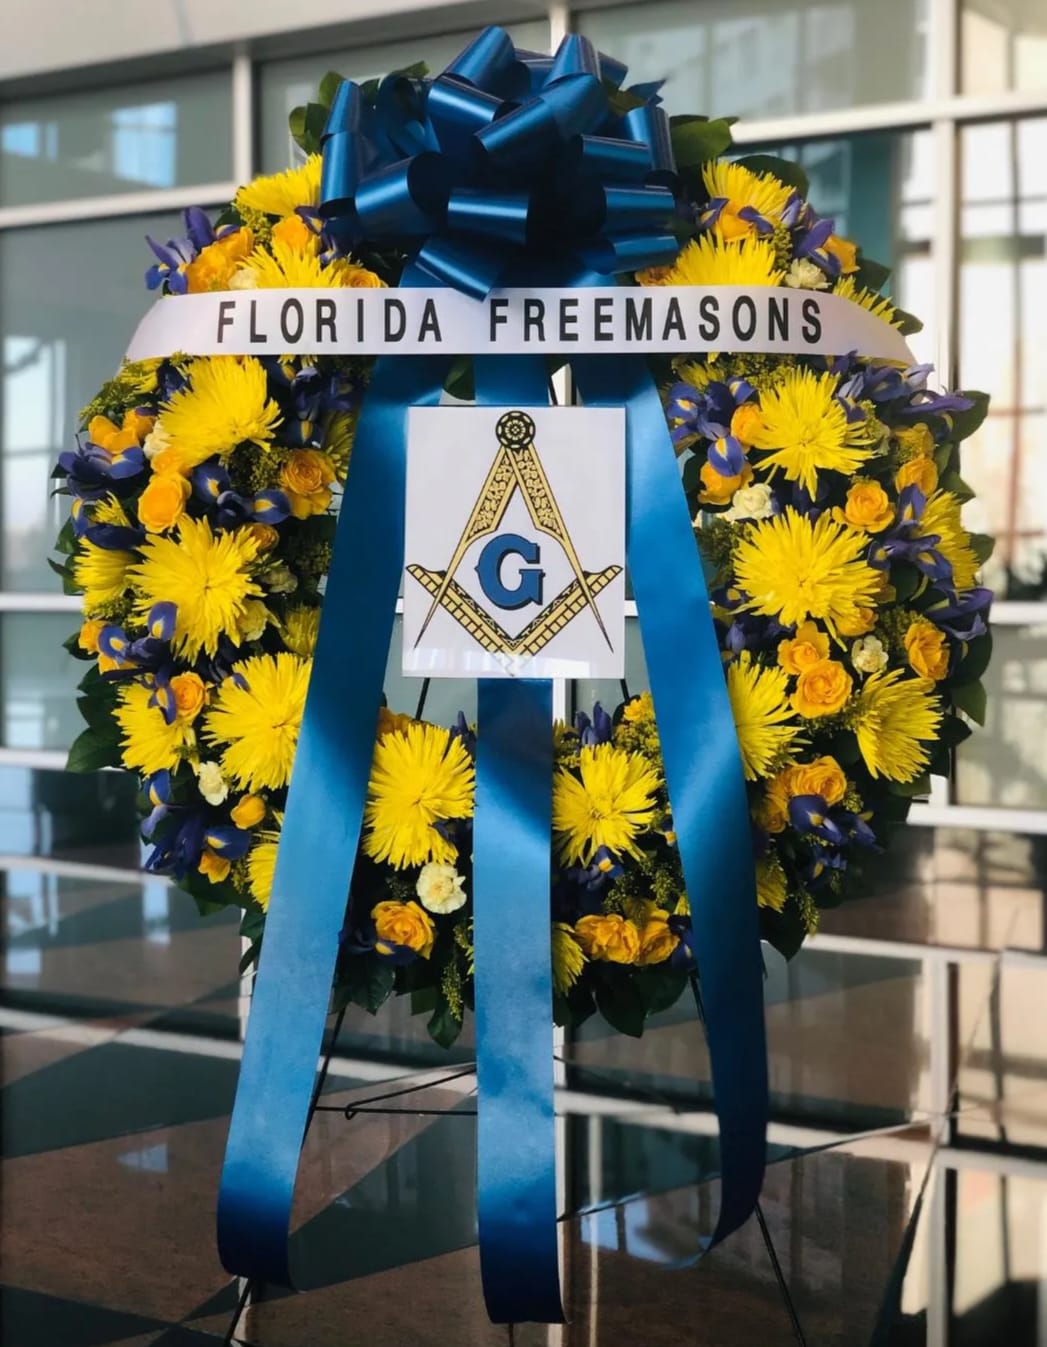 36&quot; FREEMASON WREATH WITH BANNER AND PLACARD - FREEMASON WREATH  BY TWIN TOWERS FLORIST WITH HORIZONTAL BANNER AND SQUARE AND COMPASS MASONIC LOGO ENCASED IN A CUSTOM ACRYLIC PLACARD.  AS SHOWN:  36&quot; DIAMETER WREATH